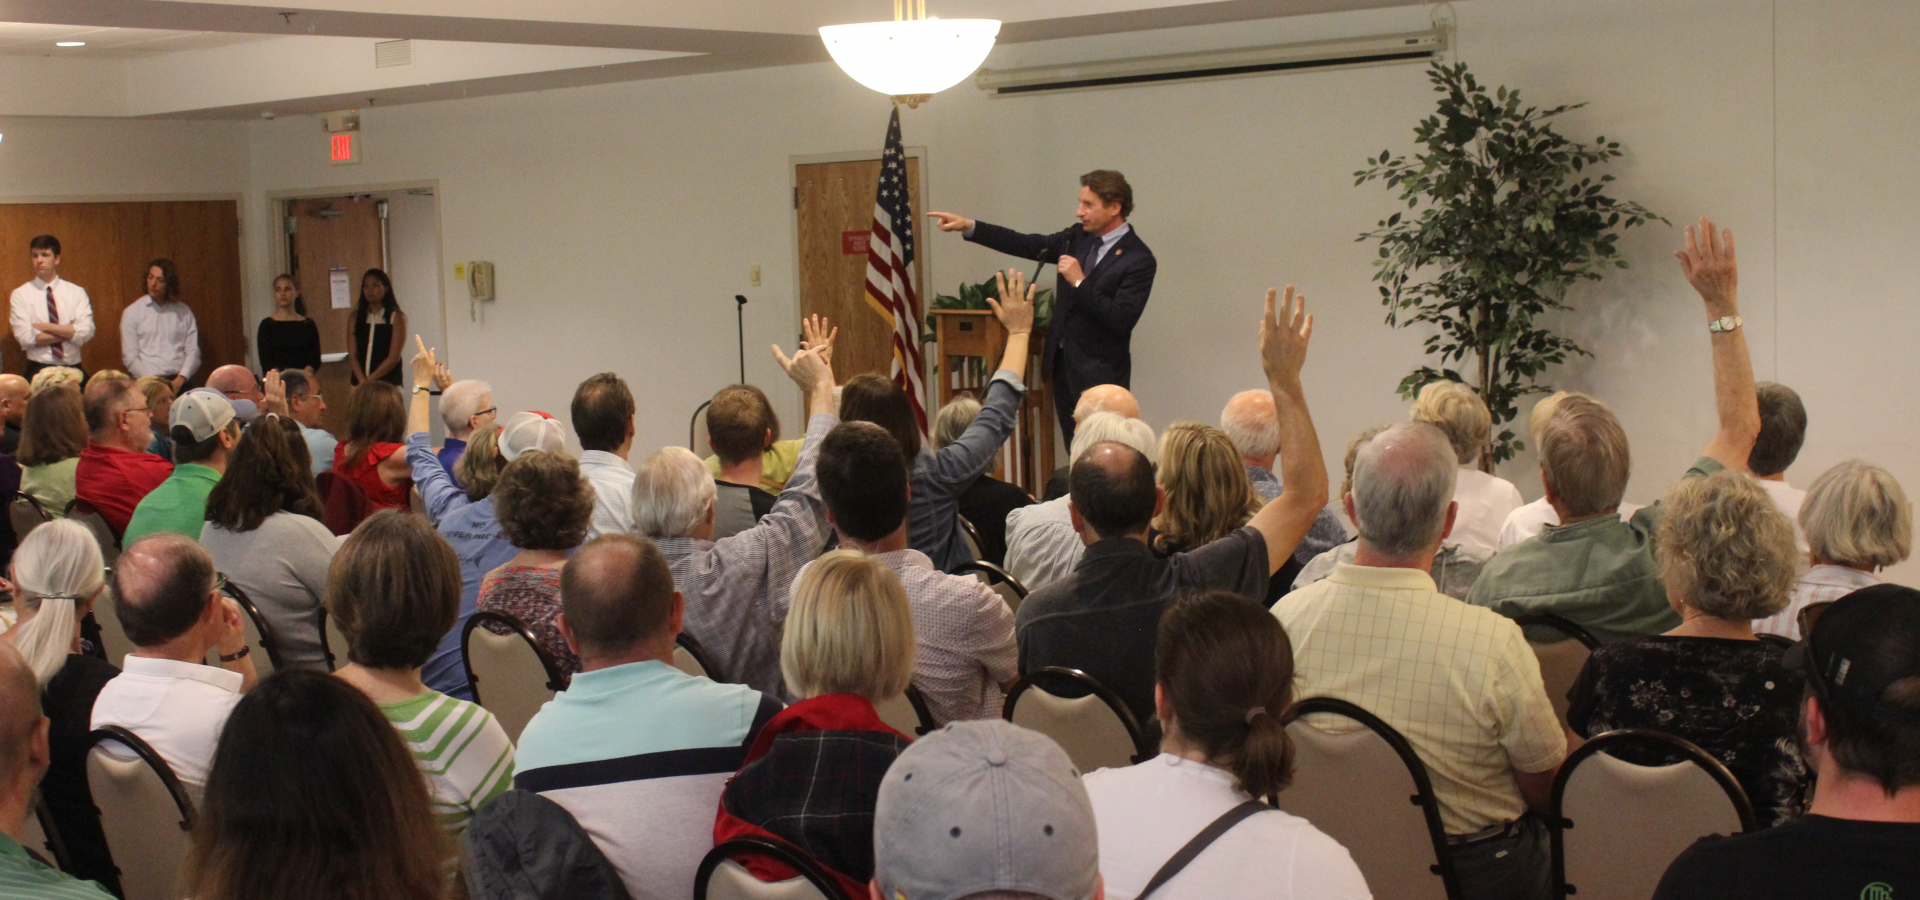 Representation begins with listening - Rep. Phillips answers questions at a town hall meeting